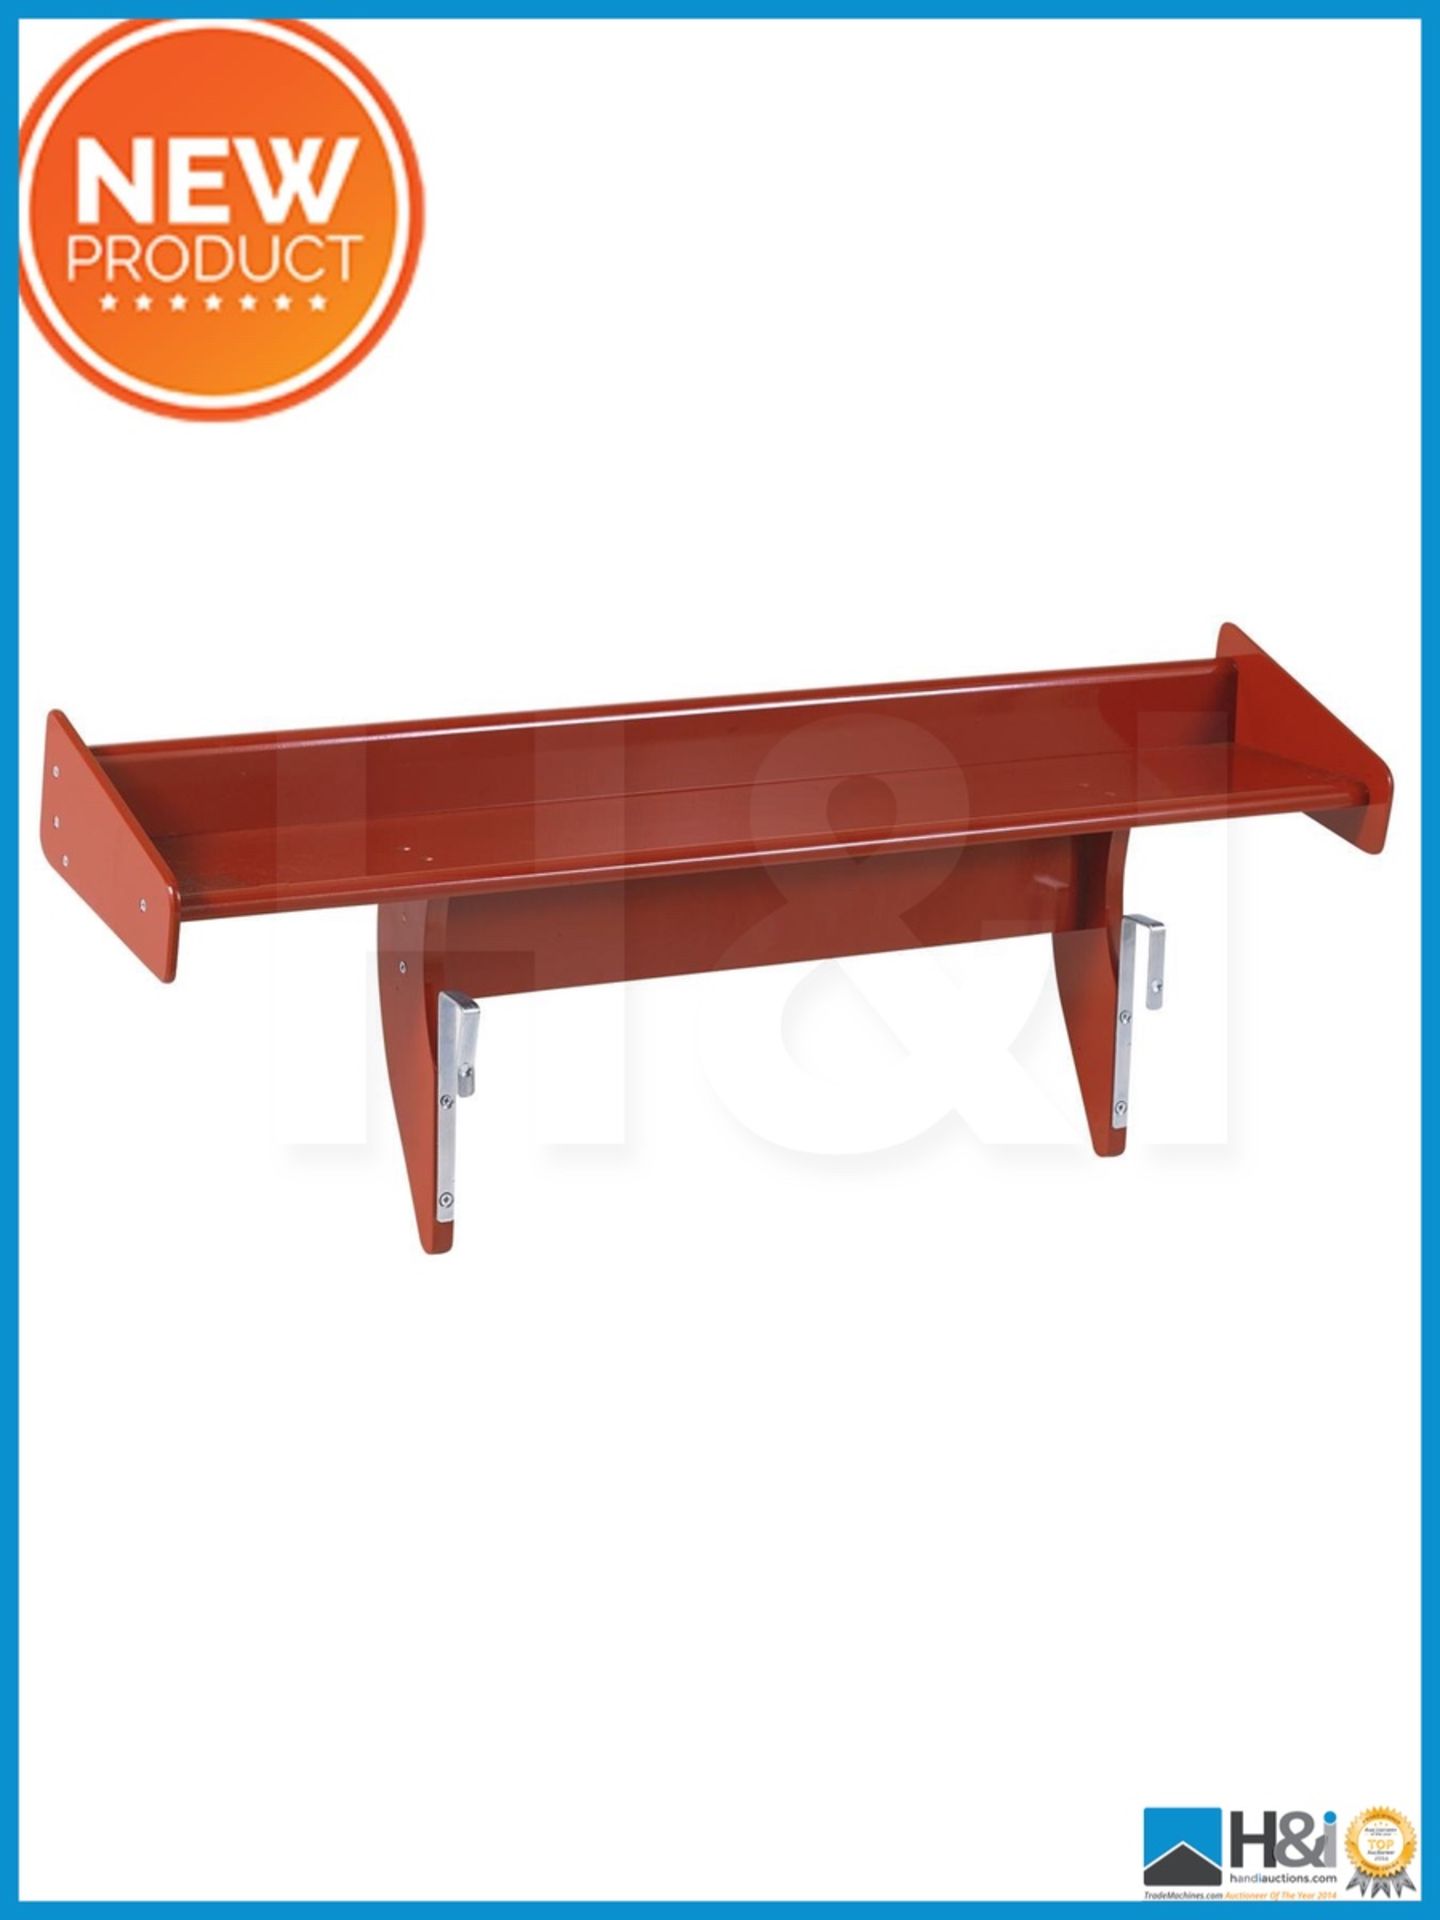 NEW IN BOX CAR BED SPOILER [RED] 0 x 0 x 0cm RRP £42 Appraisal: Viewing Essential Serial No: NA